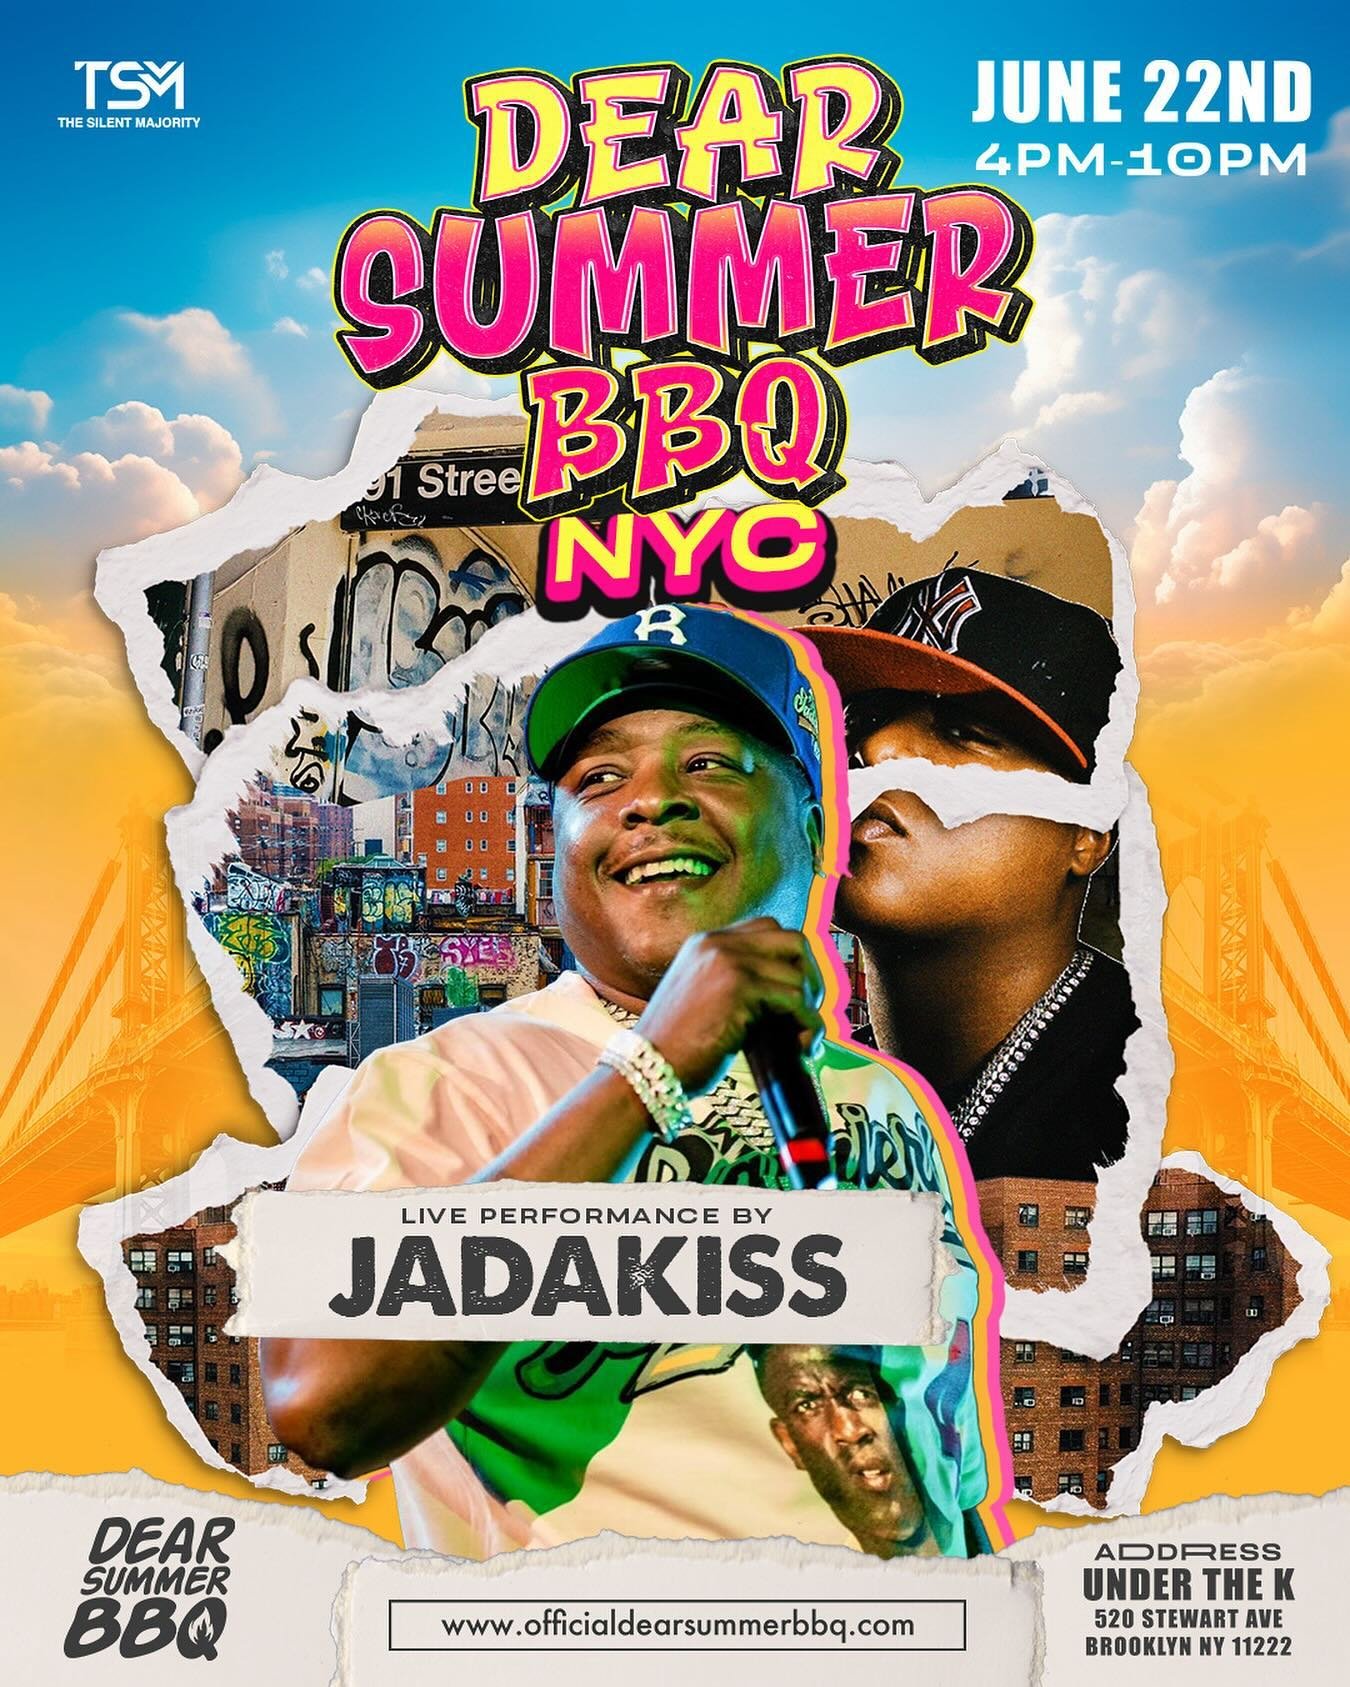 On The Day We Dropped Some Big News, NYC Shook Just A Little 🤷🏾&zwj;♂️

So Just In Case You Missed It,

A &ldquo;L&bull;E&bull;G&bull;E&bull;N&bull;D&rdquo; Will Be Hitting The Stage This Year At #DearSummerBBQ NYC👀

We Know That @jadakiss Perform